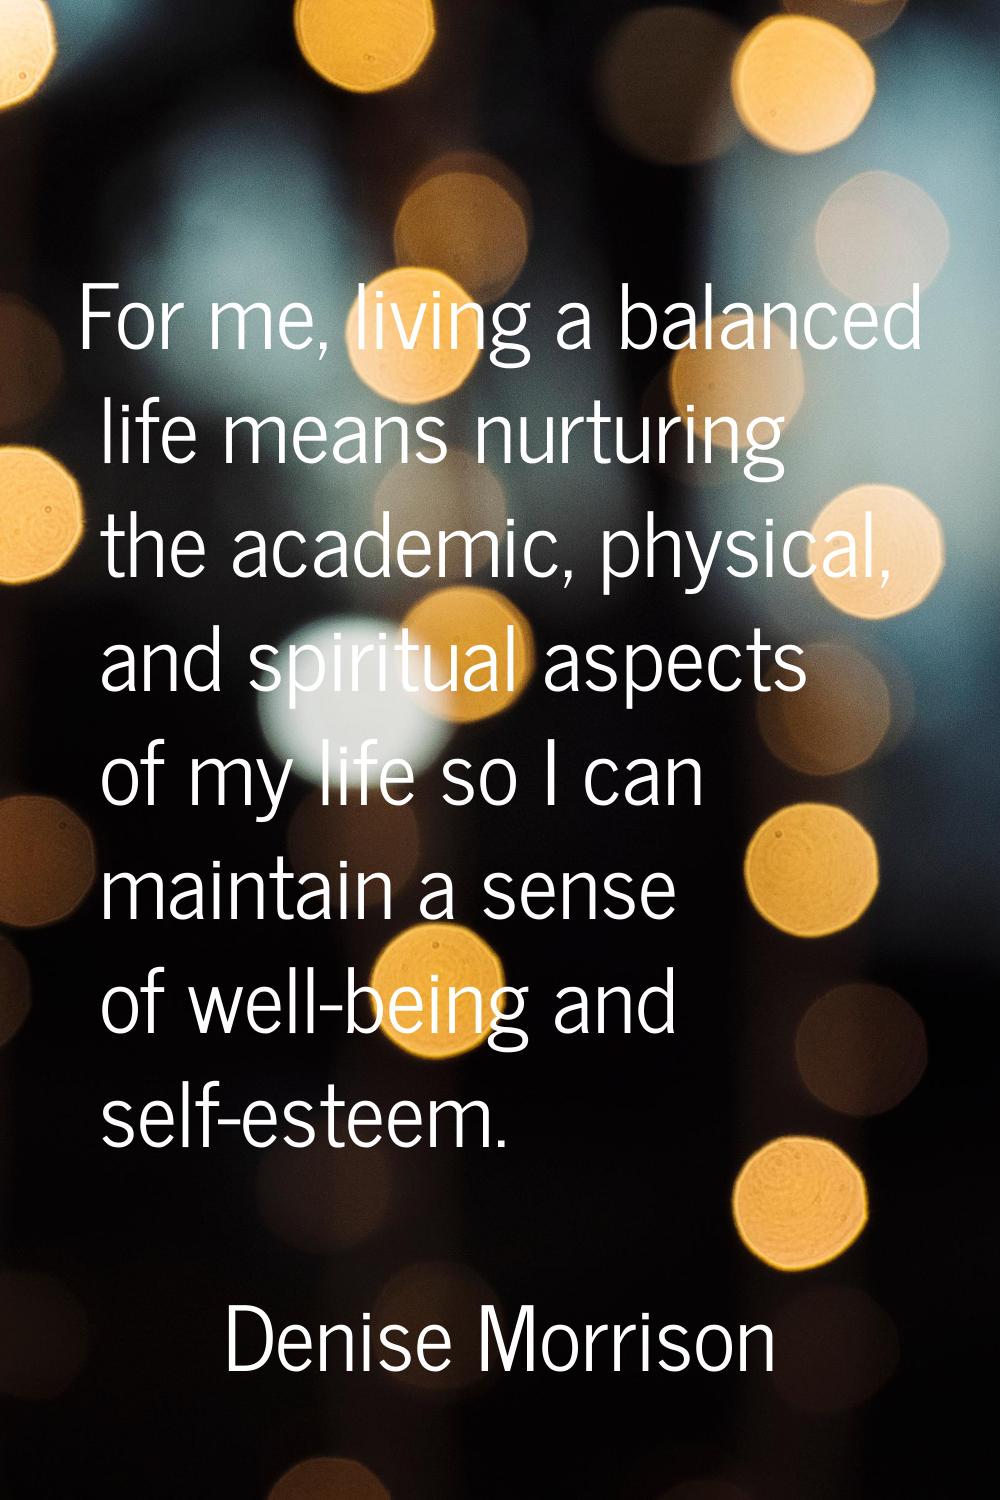 For me, living a balanced life means nurturing the academic, physical, and spiritual aspects of my 